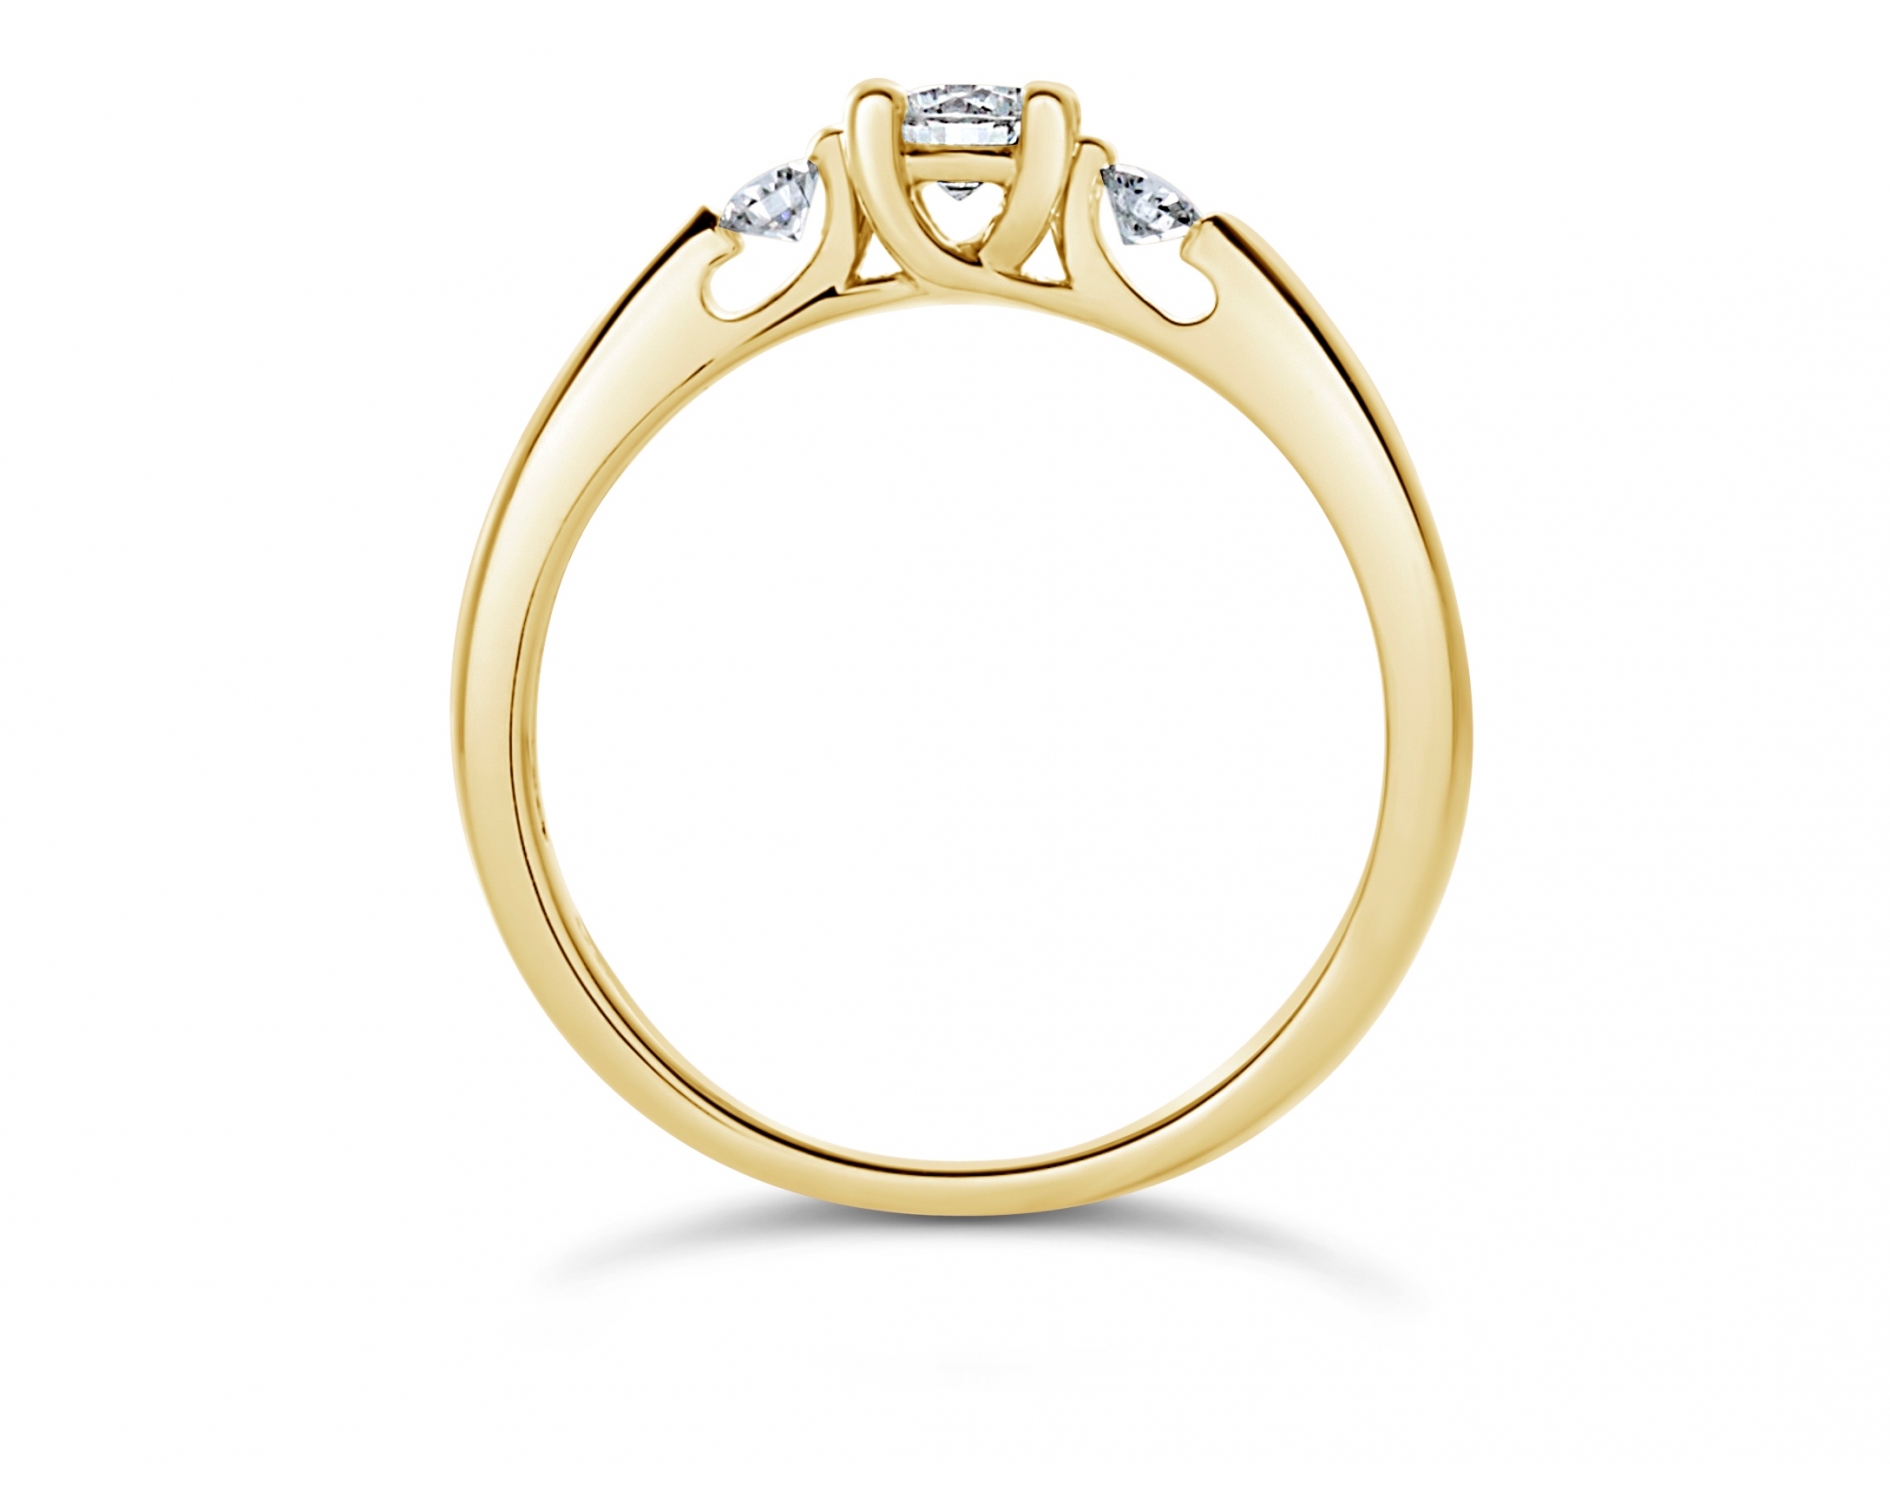 18k yellow gold 4 prong open gallery three stone engagement ring